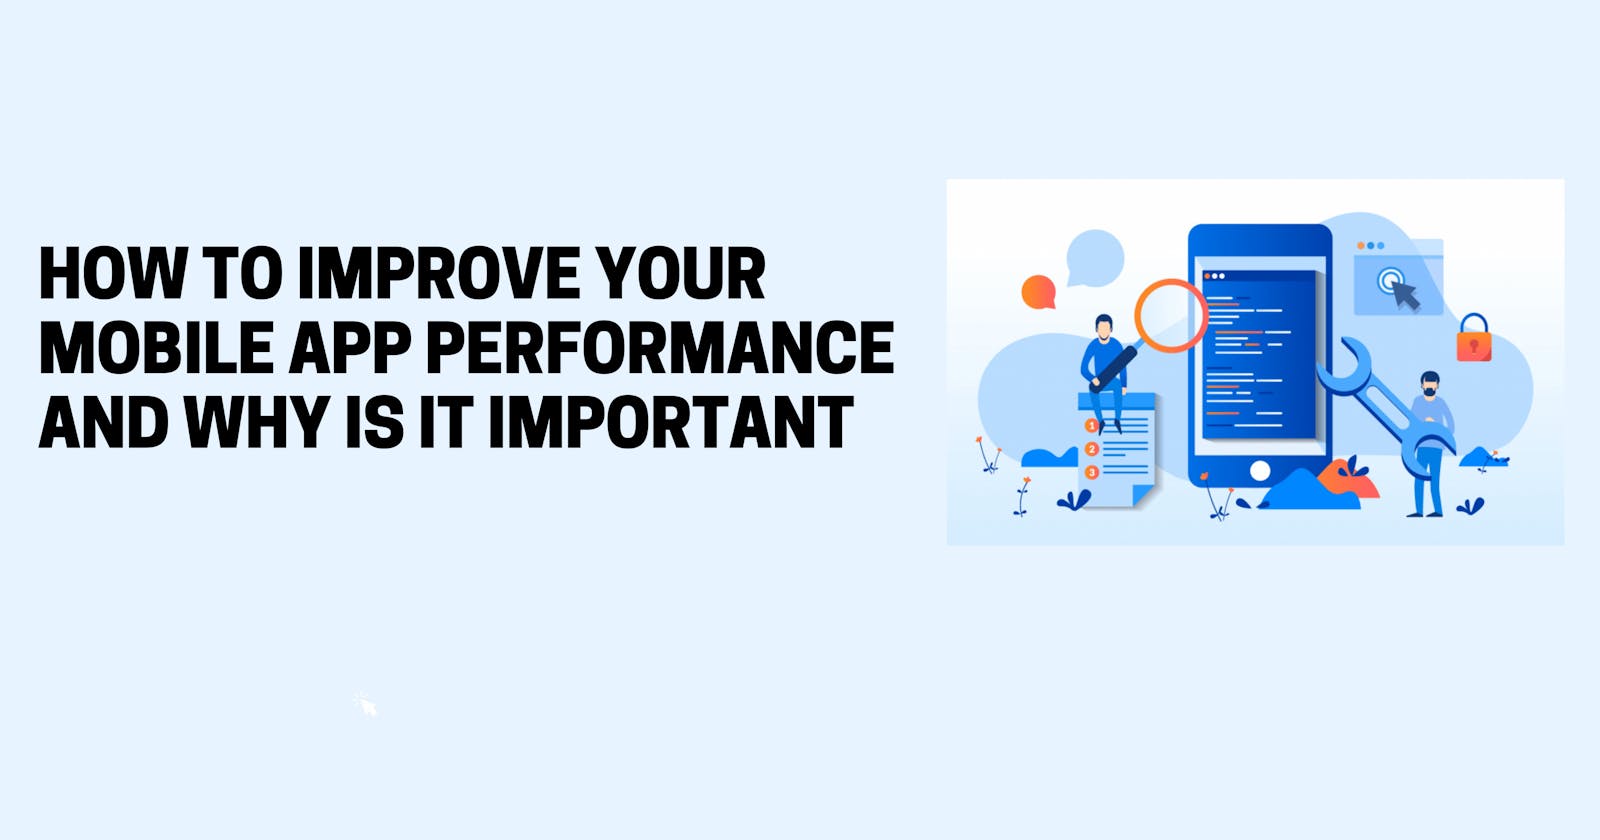 How to improve your mobile app performance and why is it important